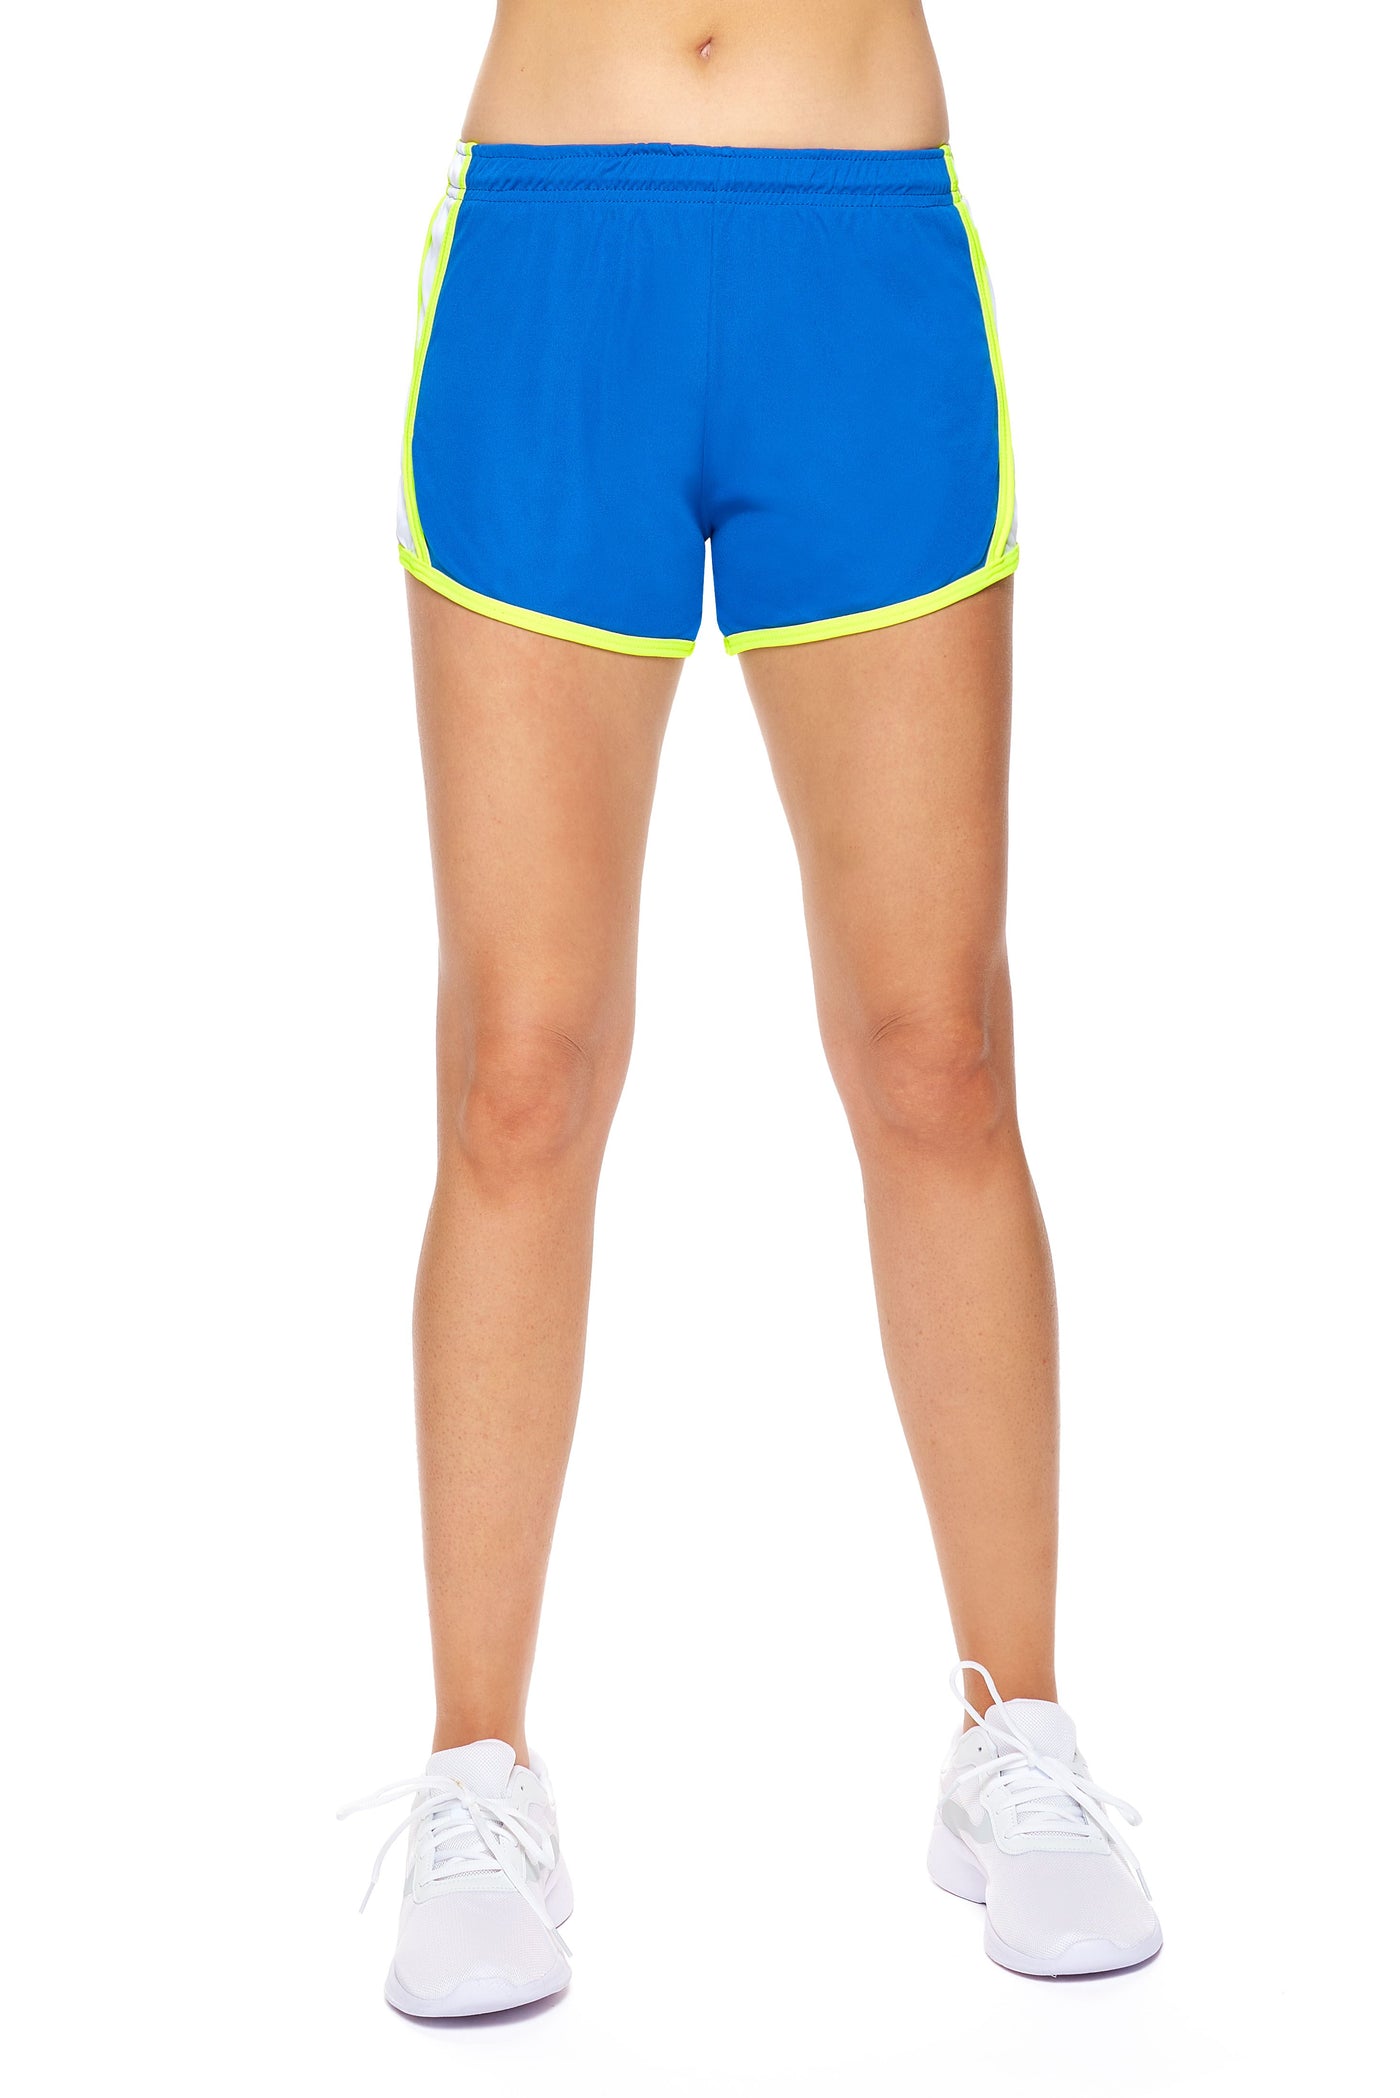 DriMax™ Go Active Shorts 🇺🇸 - Expert Brand Apparel#color_royal-white-safety